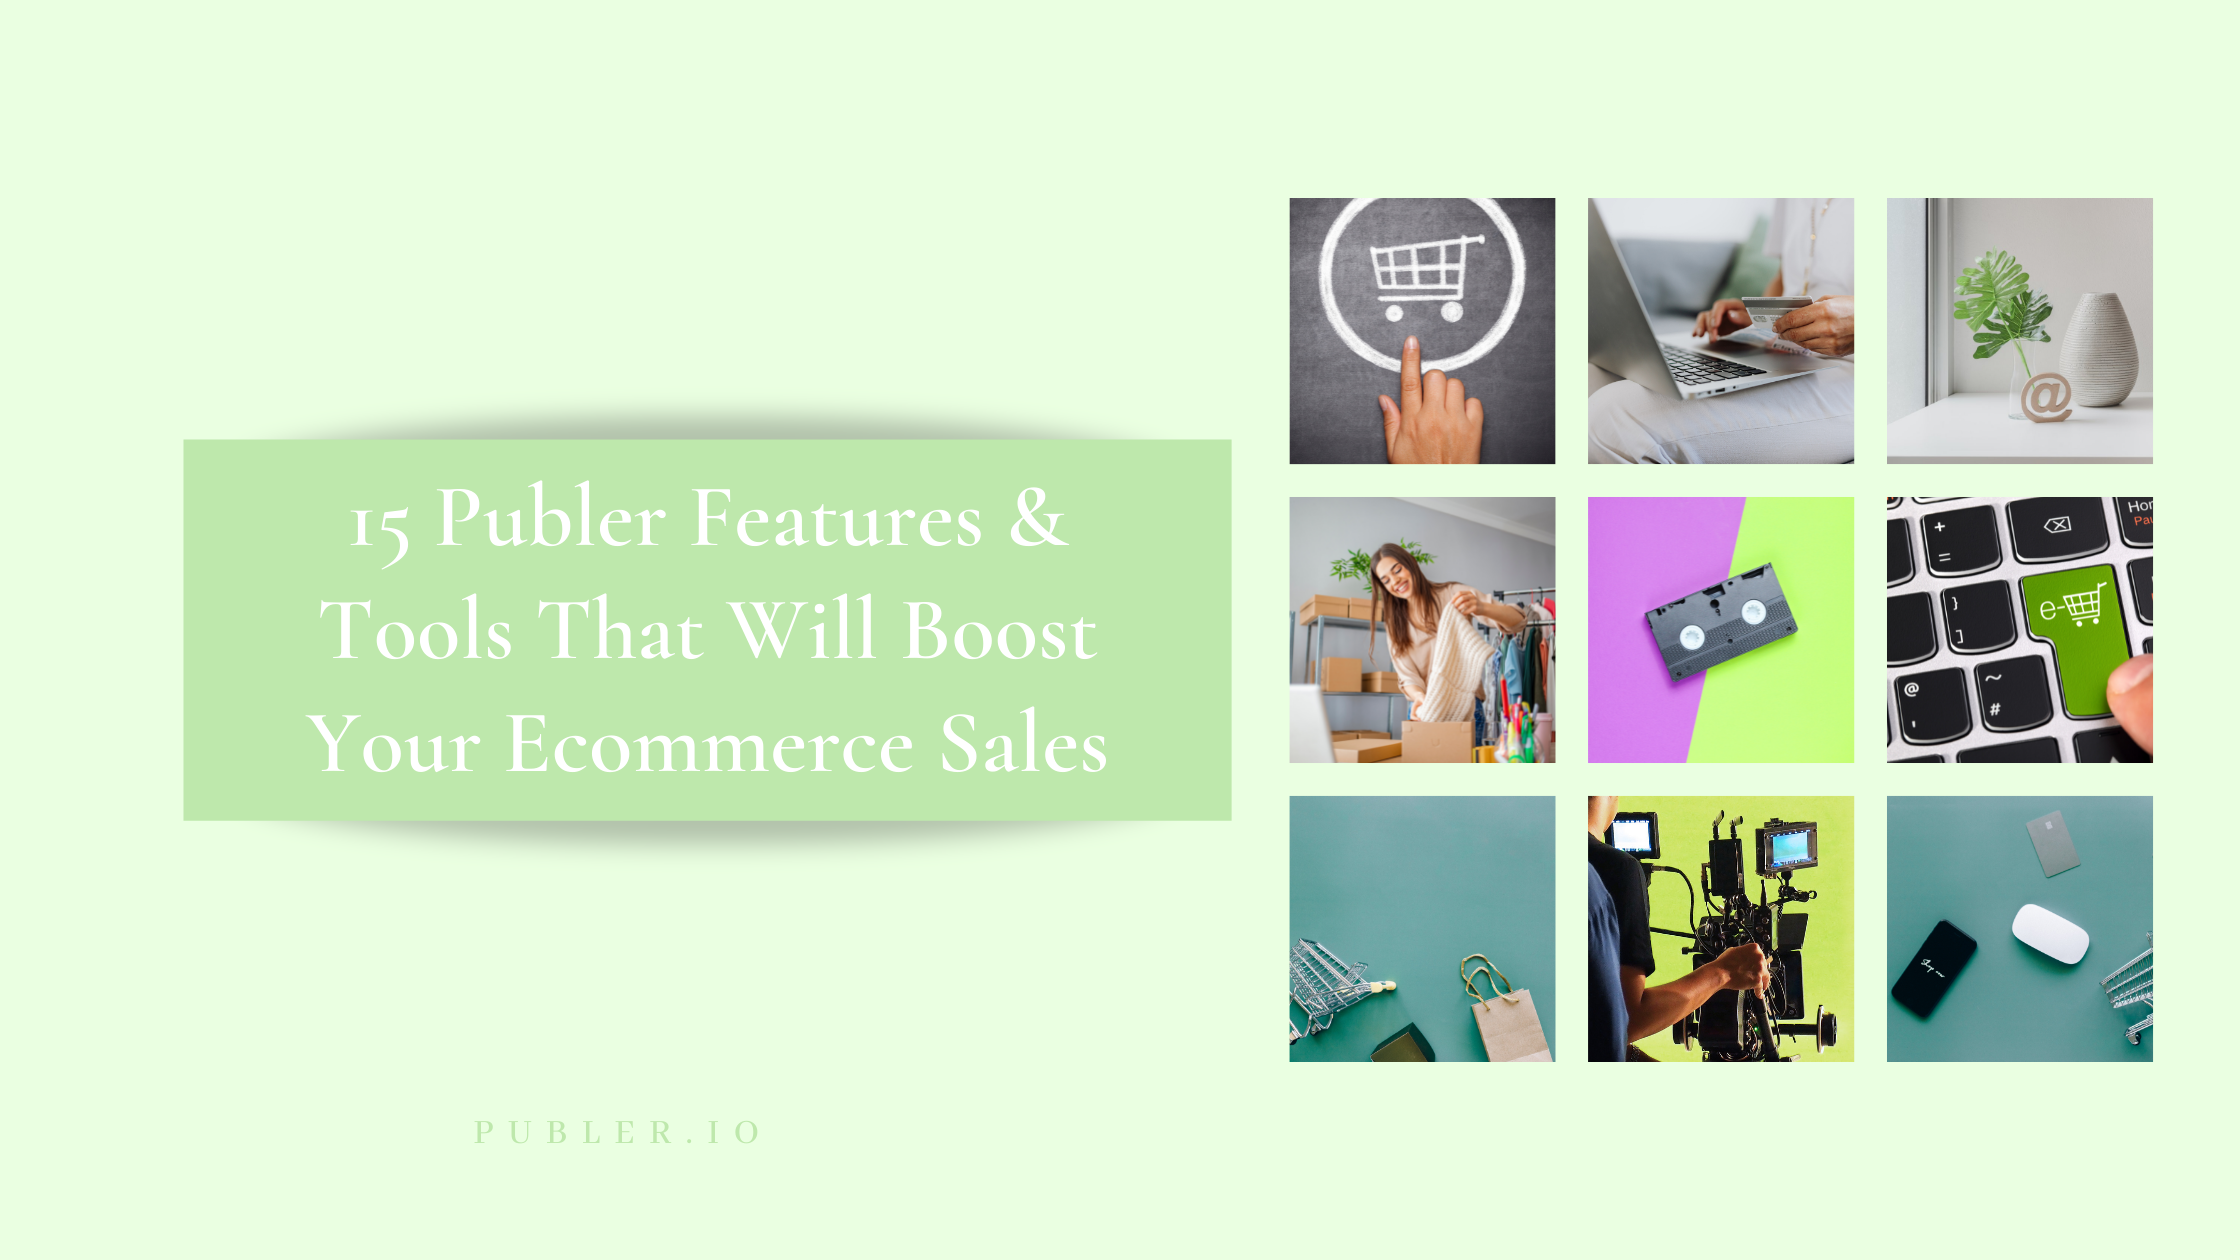 15 Publer Features & Tools That Will Boost Your Ecommerce Sales